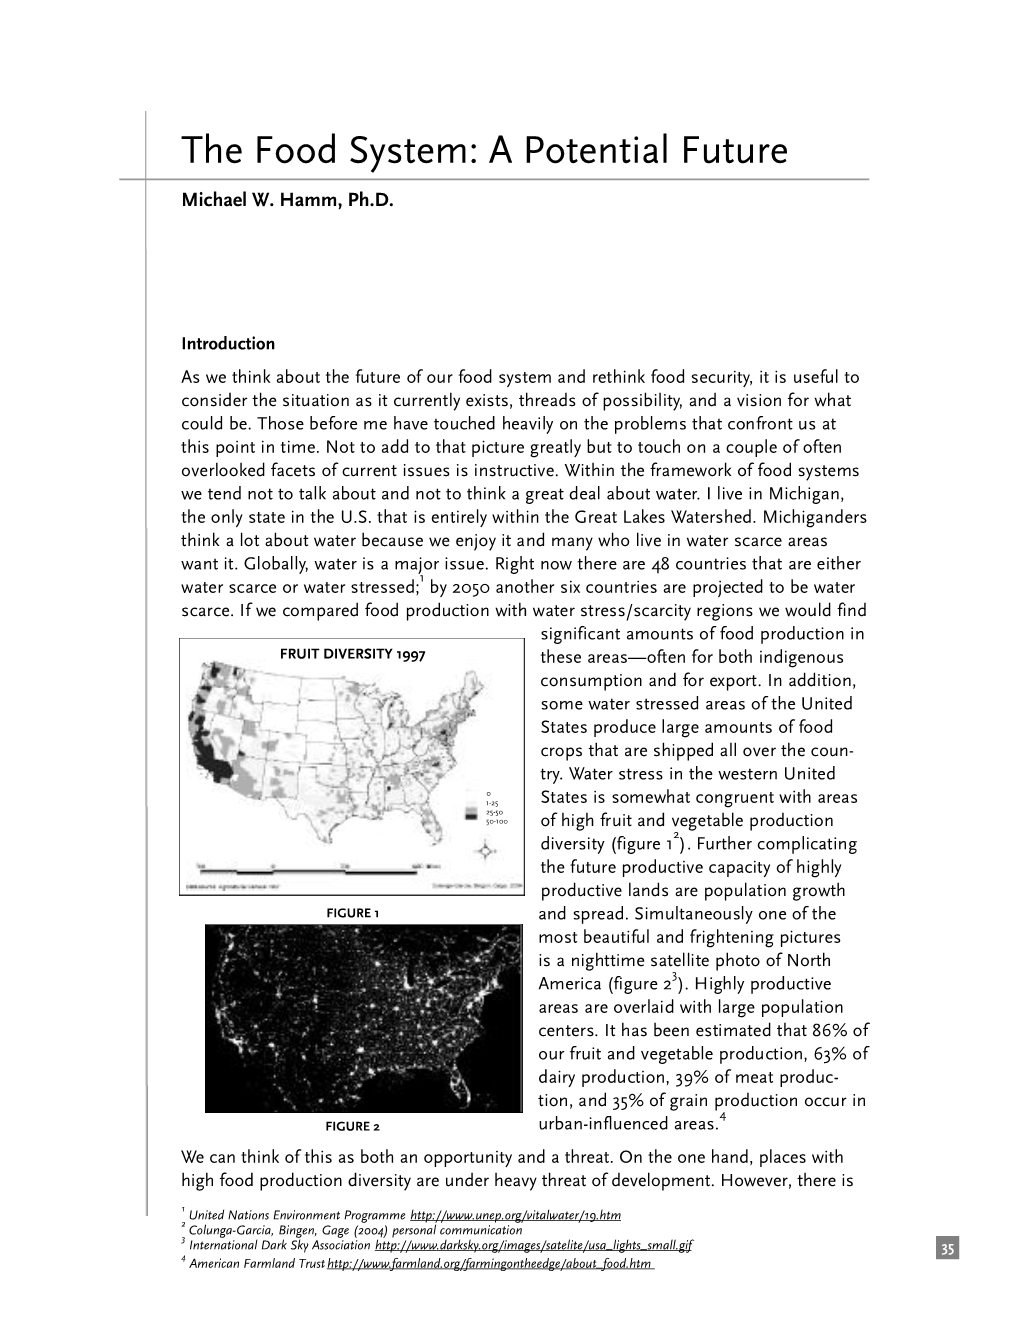 The Food System: a Potential Future Michael W